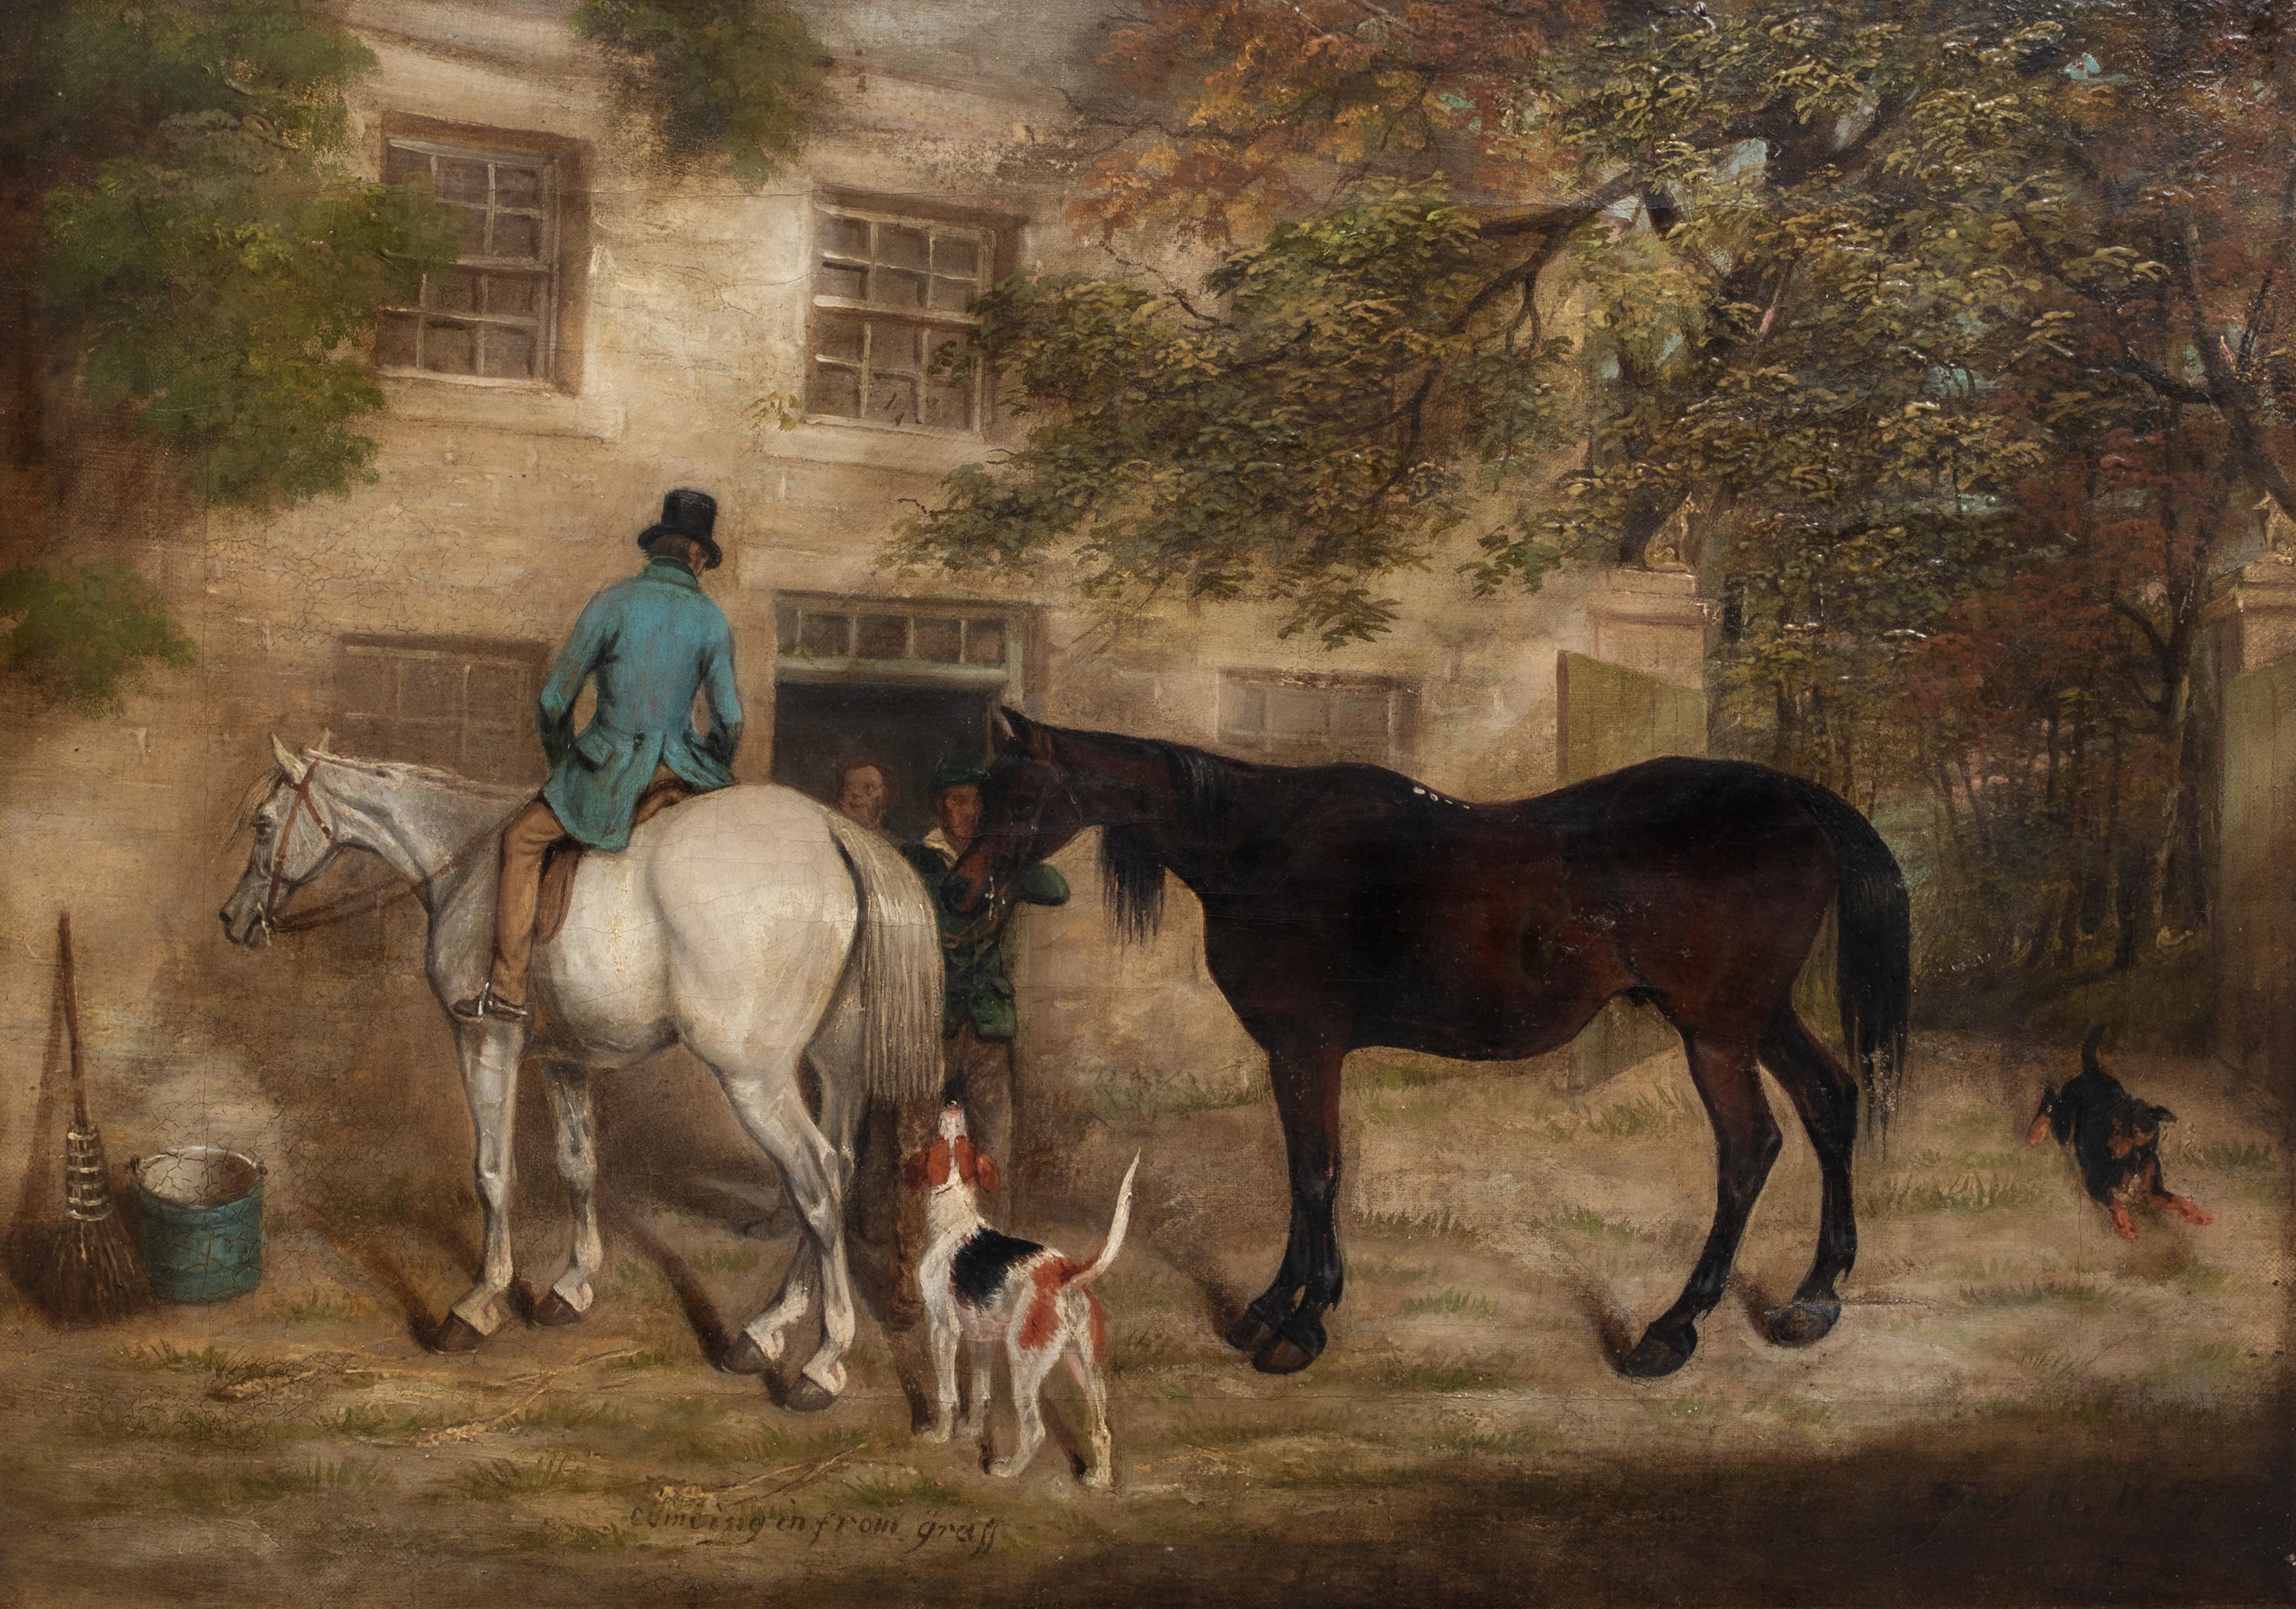 Coming IN From The Grass, dated 1848

by James Russell RYOTT (1810-1860) similar to $15,000 on of a pair

19th century English Fox Hunting Party scene, oil on canvas by James Russell Ryott. Excellent quality and condition example of the famous